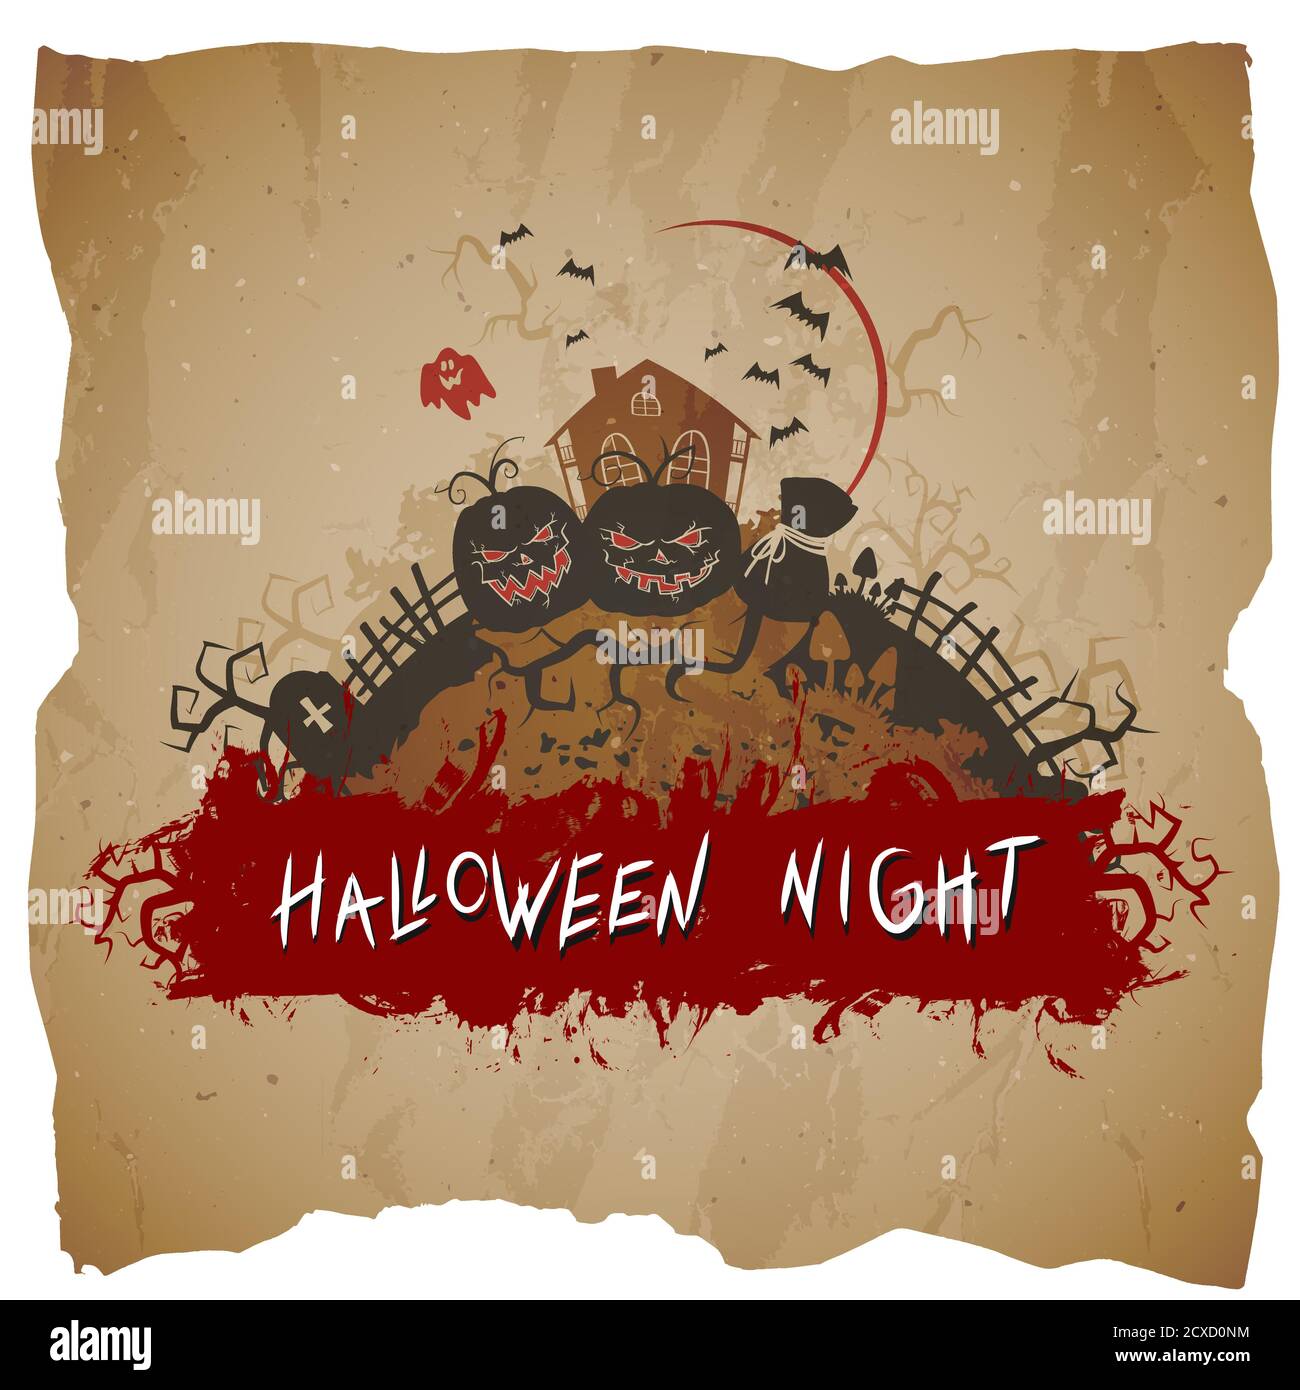 Vector Halloween illustration with abandoned house, pumpkins and inscription on grunge background. Stock Vector